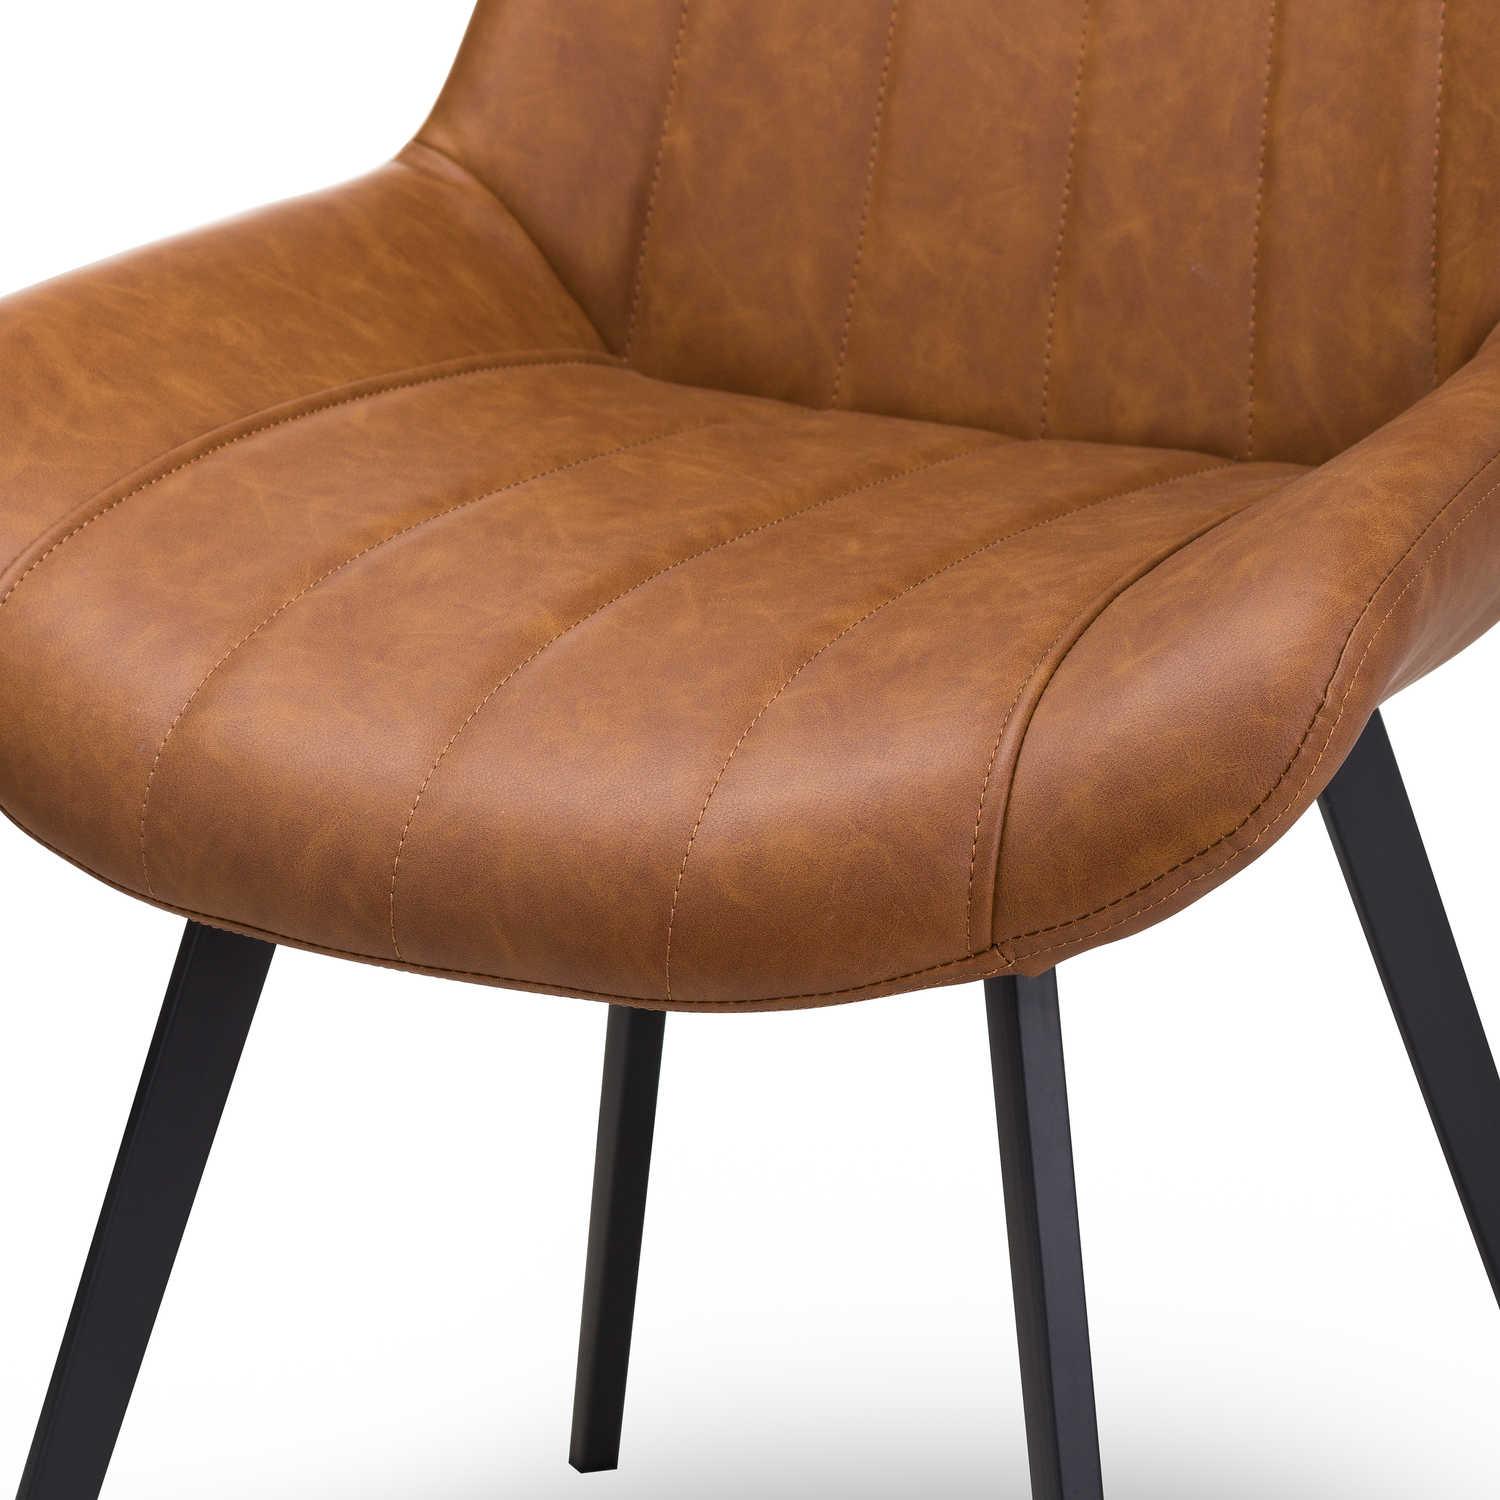 Malmo Tan Dining Chair - Vookoo Lifestyle